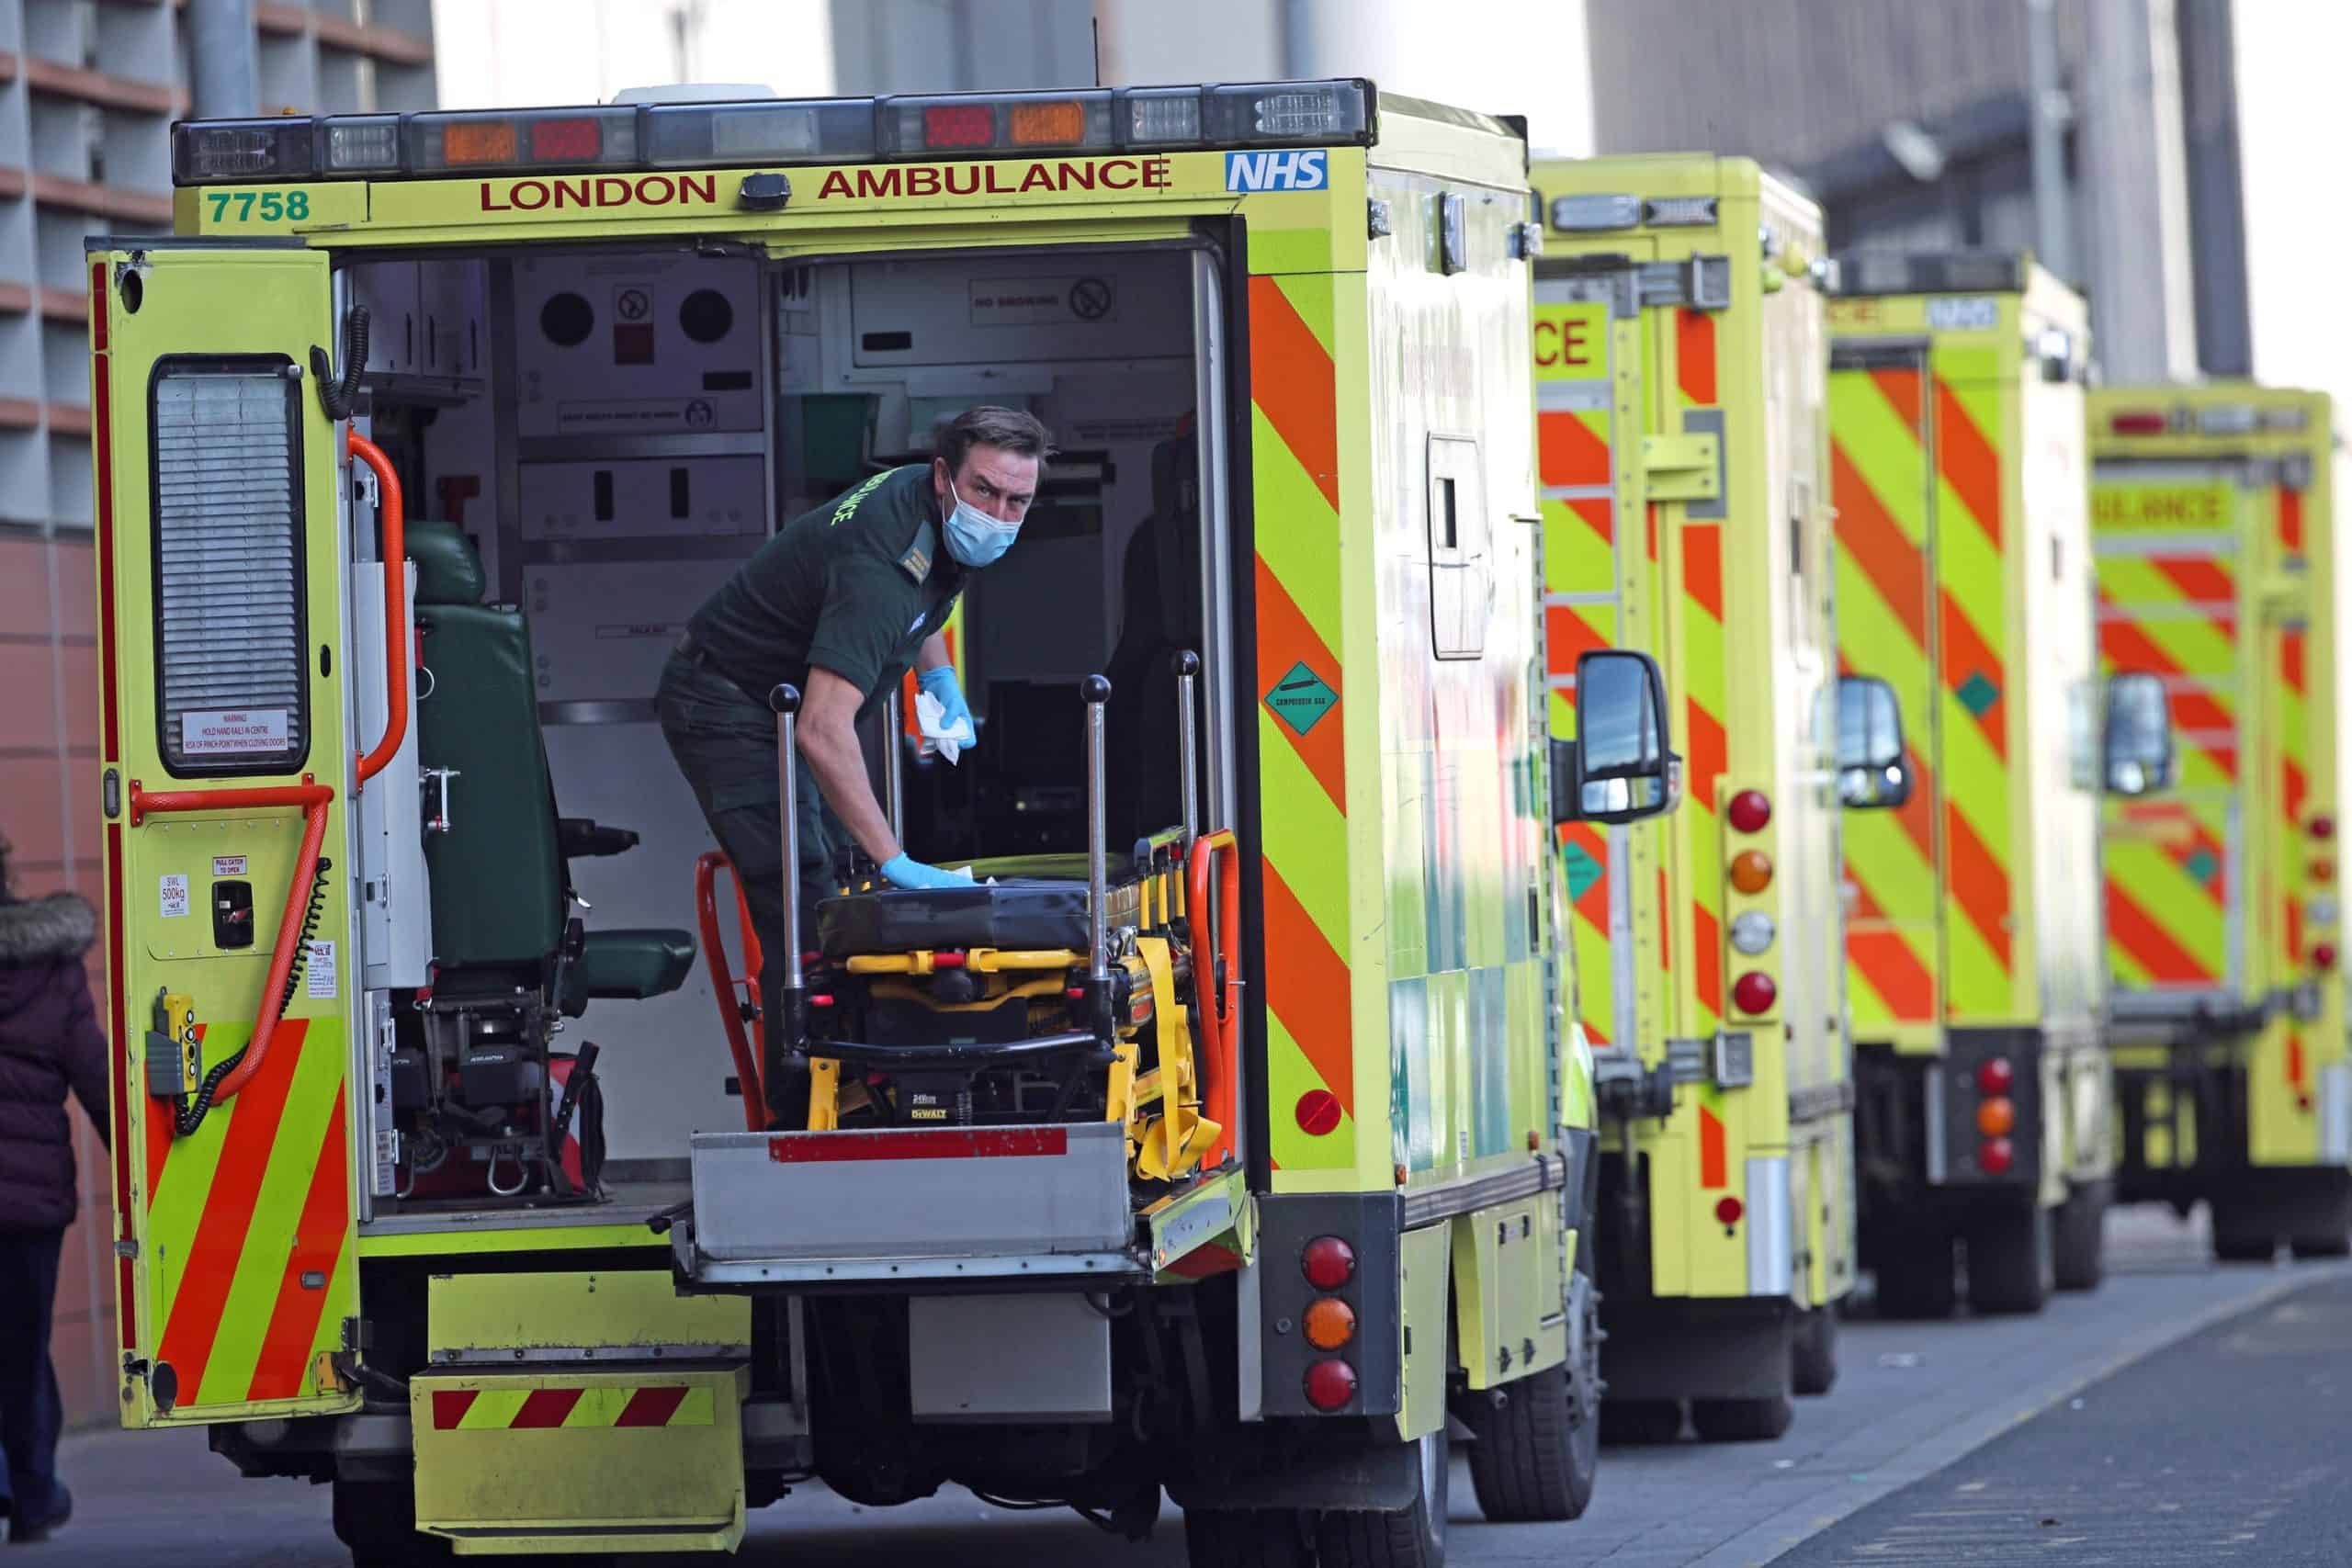 ‘Dropping like flies’ as more than one in three ambulance workers has contracted Covid